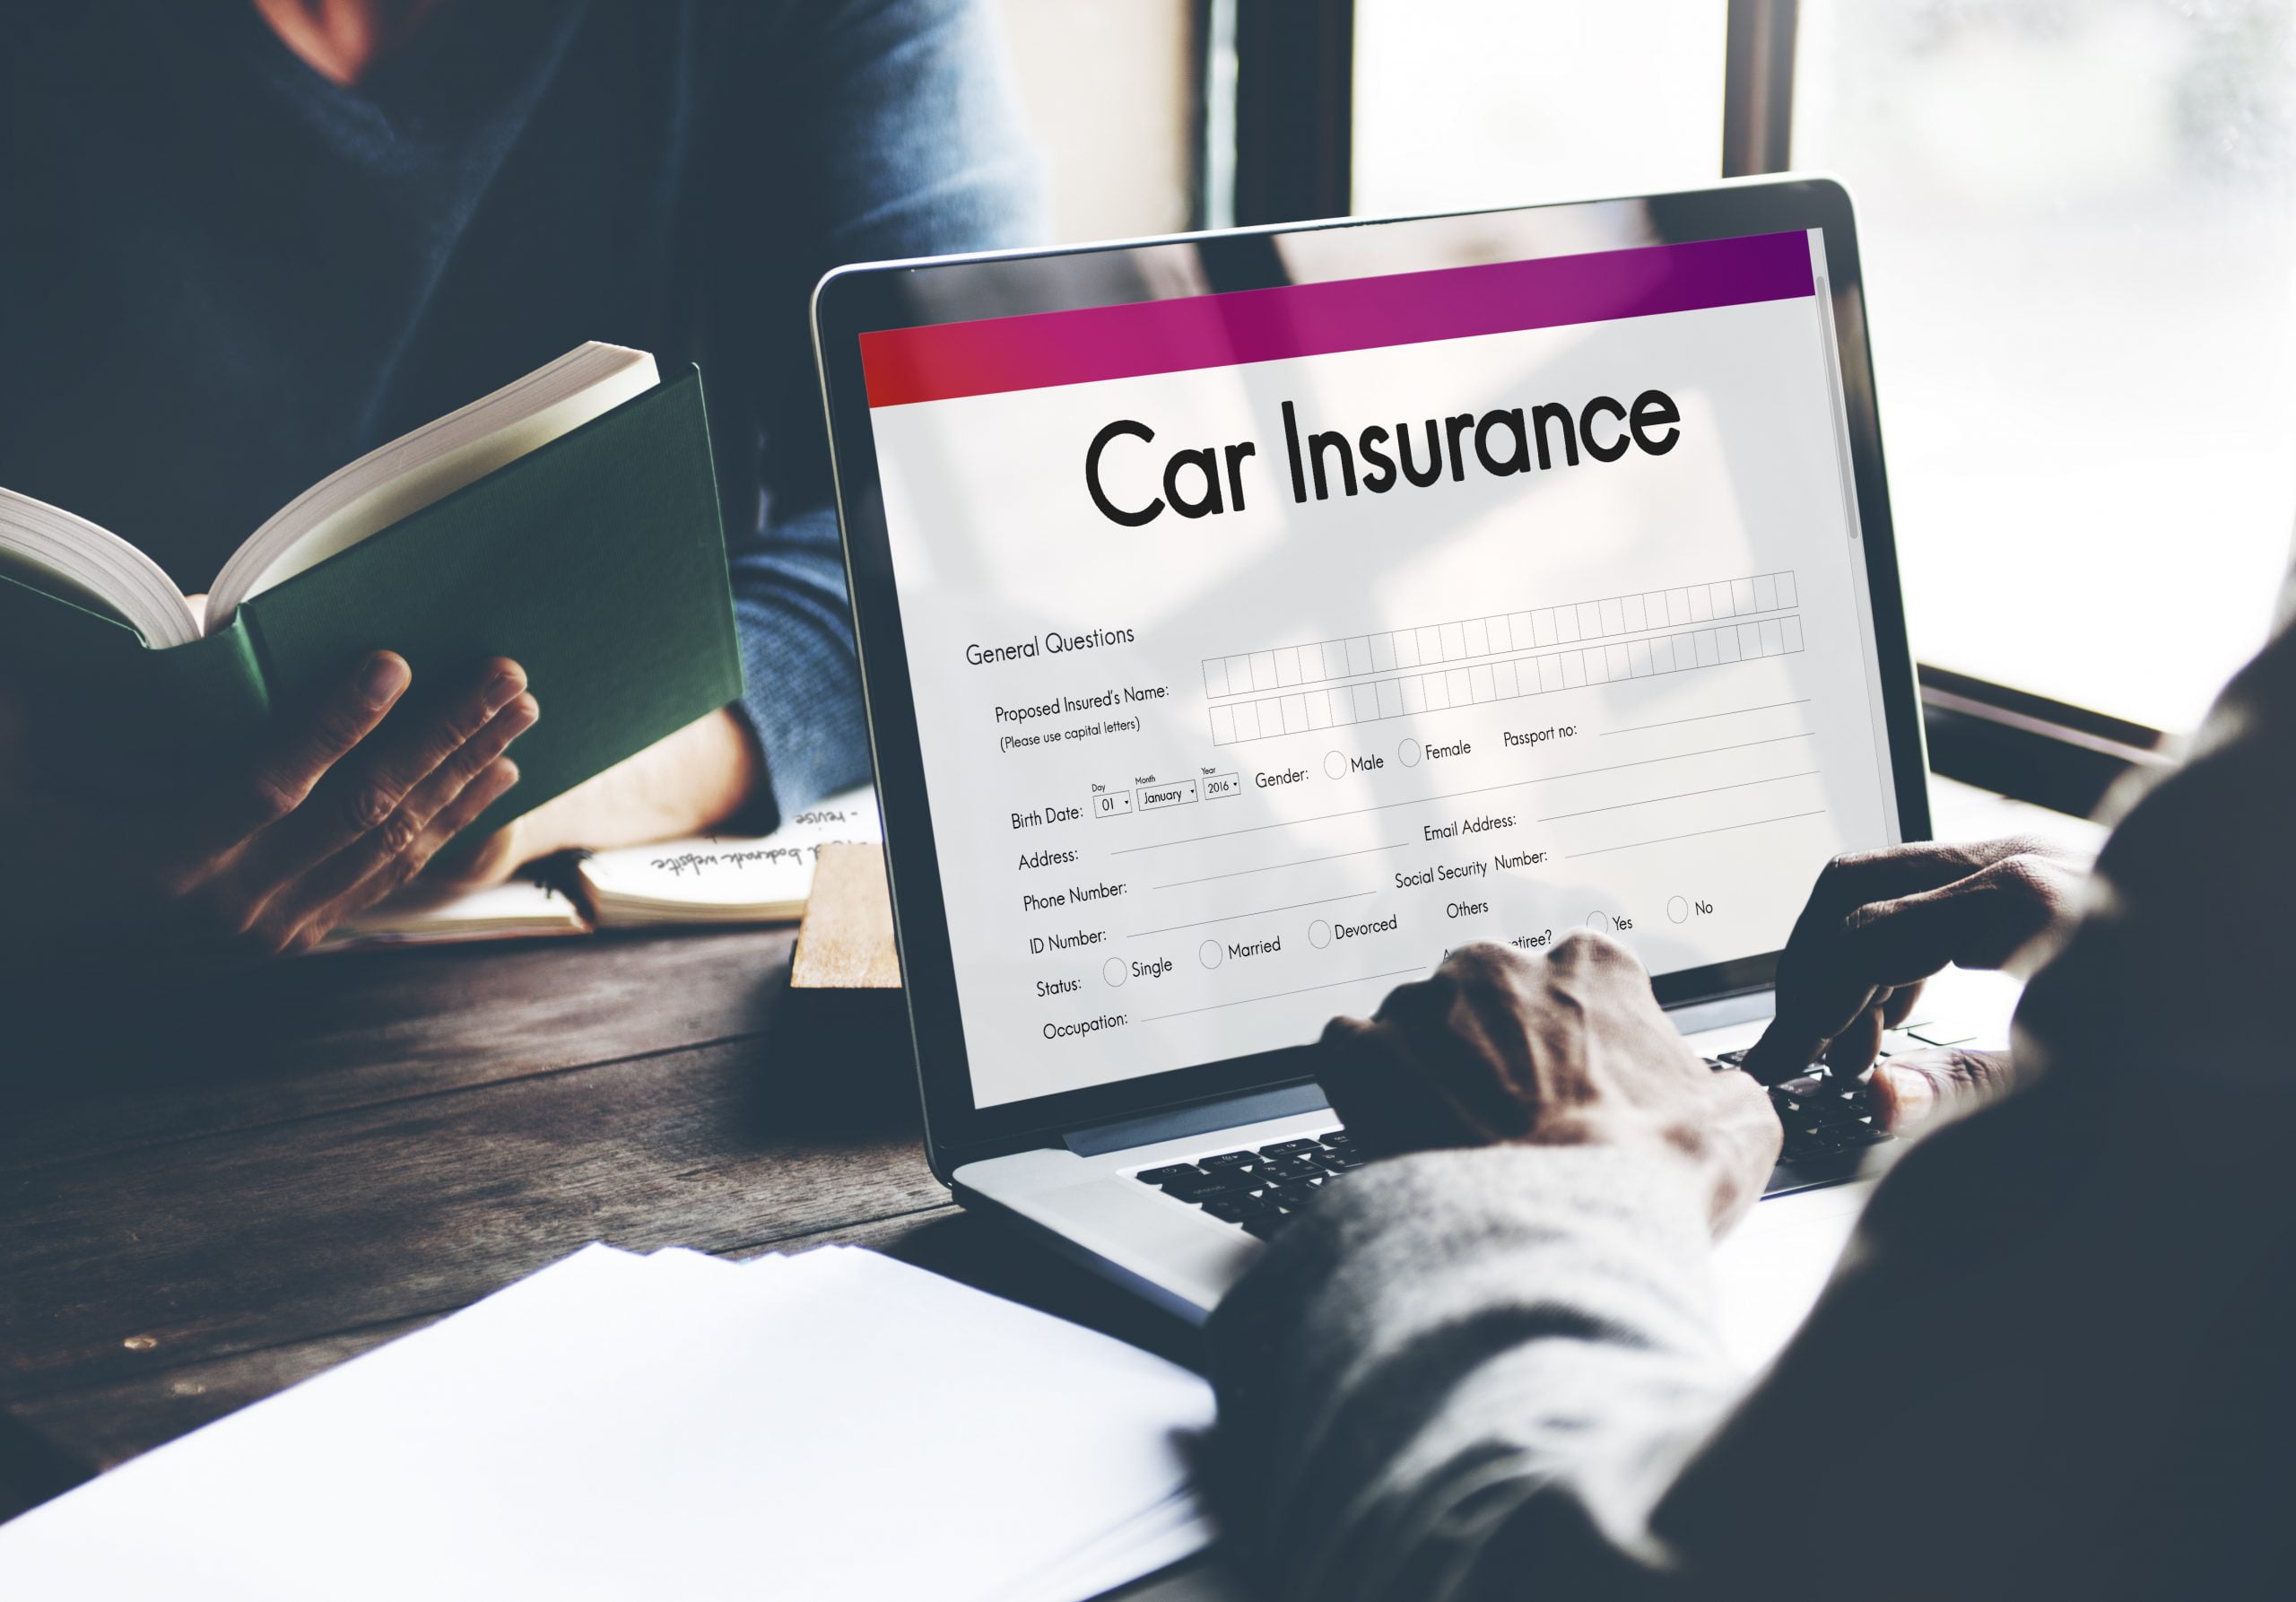 Auto insurance<br>Business insurance<br>Home insurance<br>Landlord insurance<br>Motorcycle Insurance